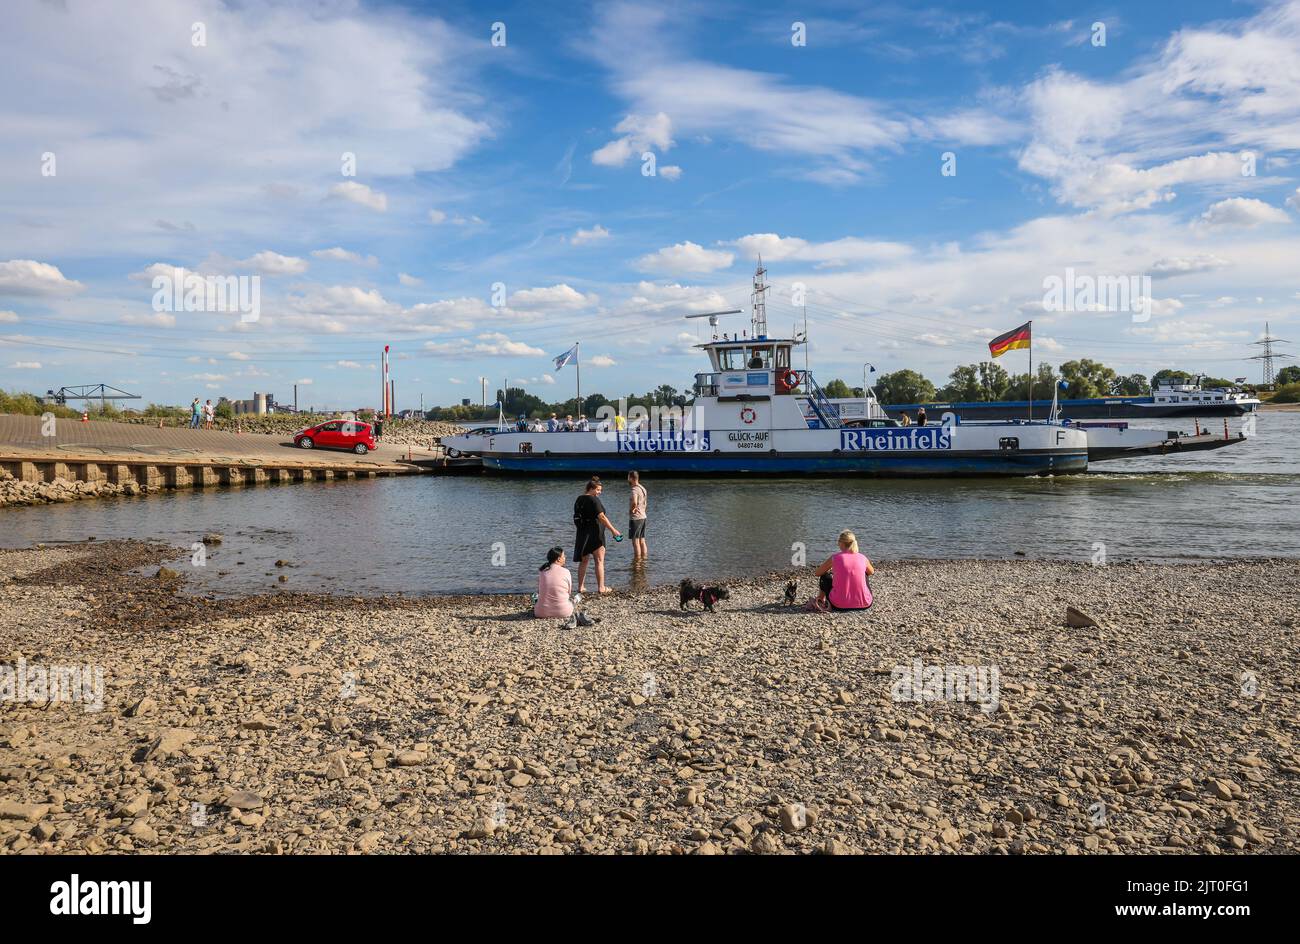 Duisburg, North Rhine-Westphalia, Germany - Dry riverbed in the Rhine at the ferry landing Walsum, Rhine ferry Walsum-Orsoy. After a long drought, the Stock Photo